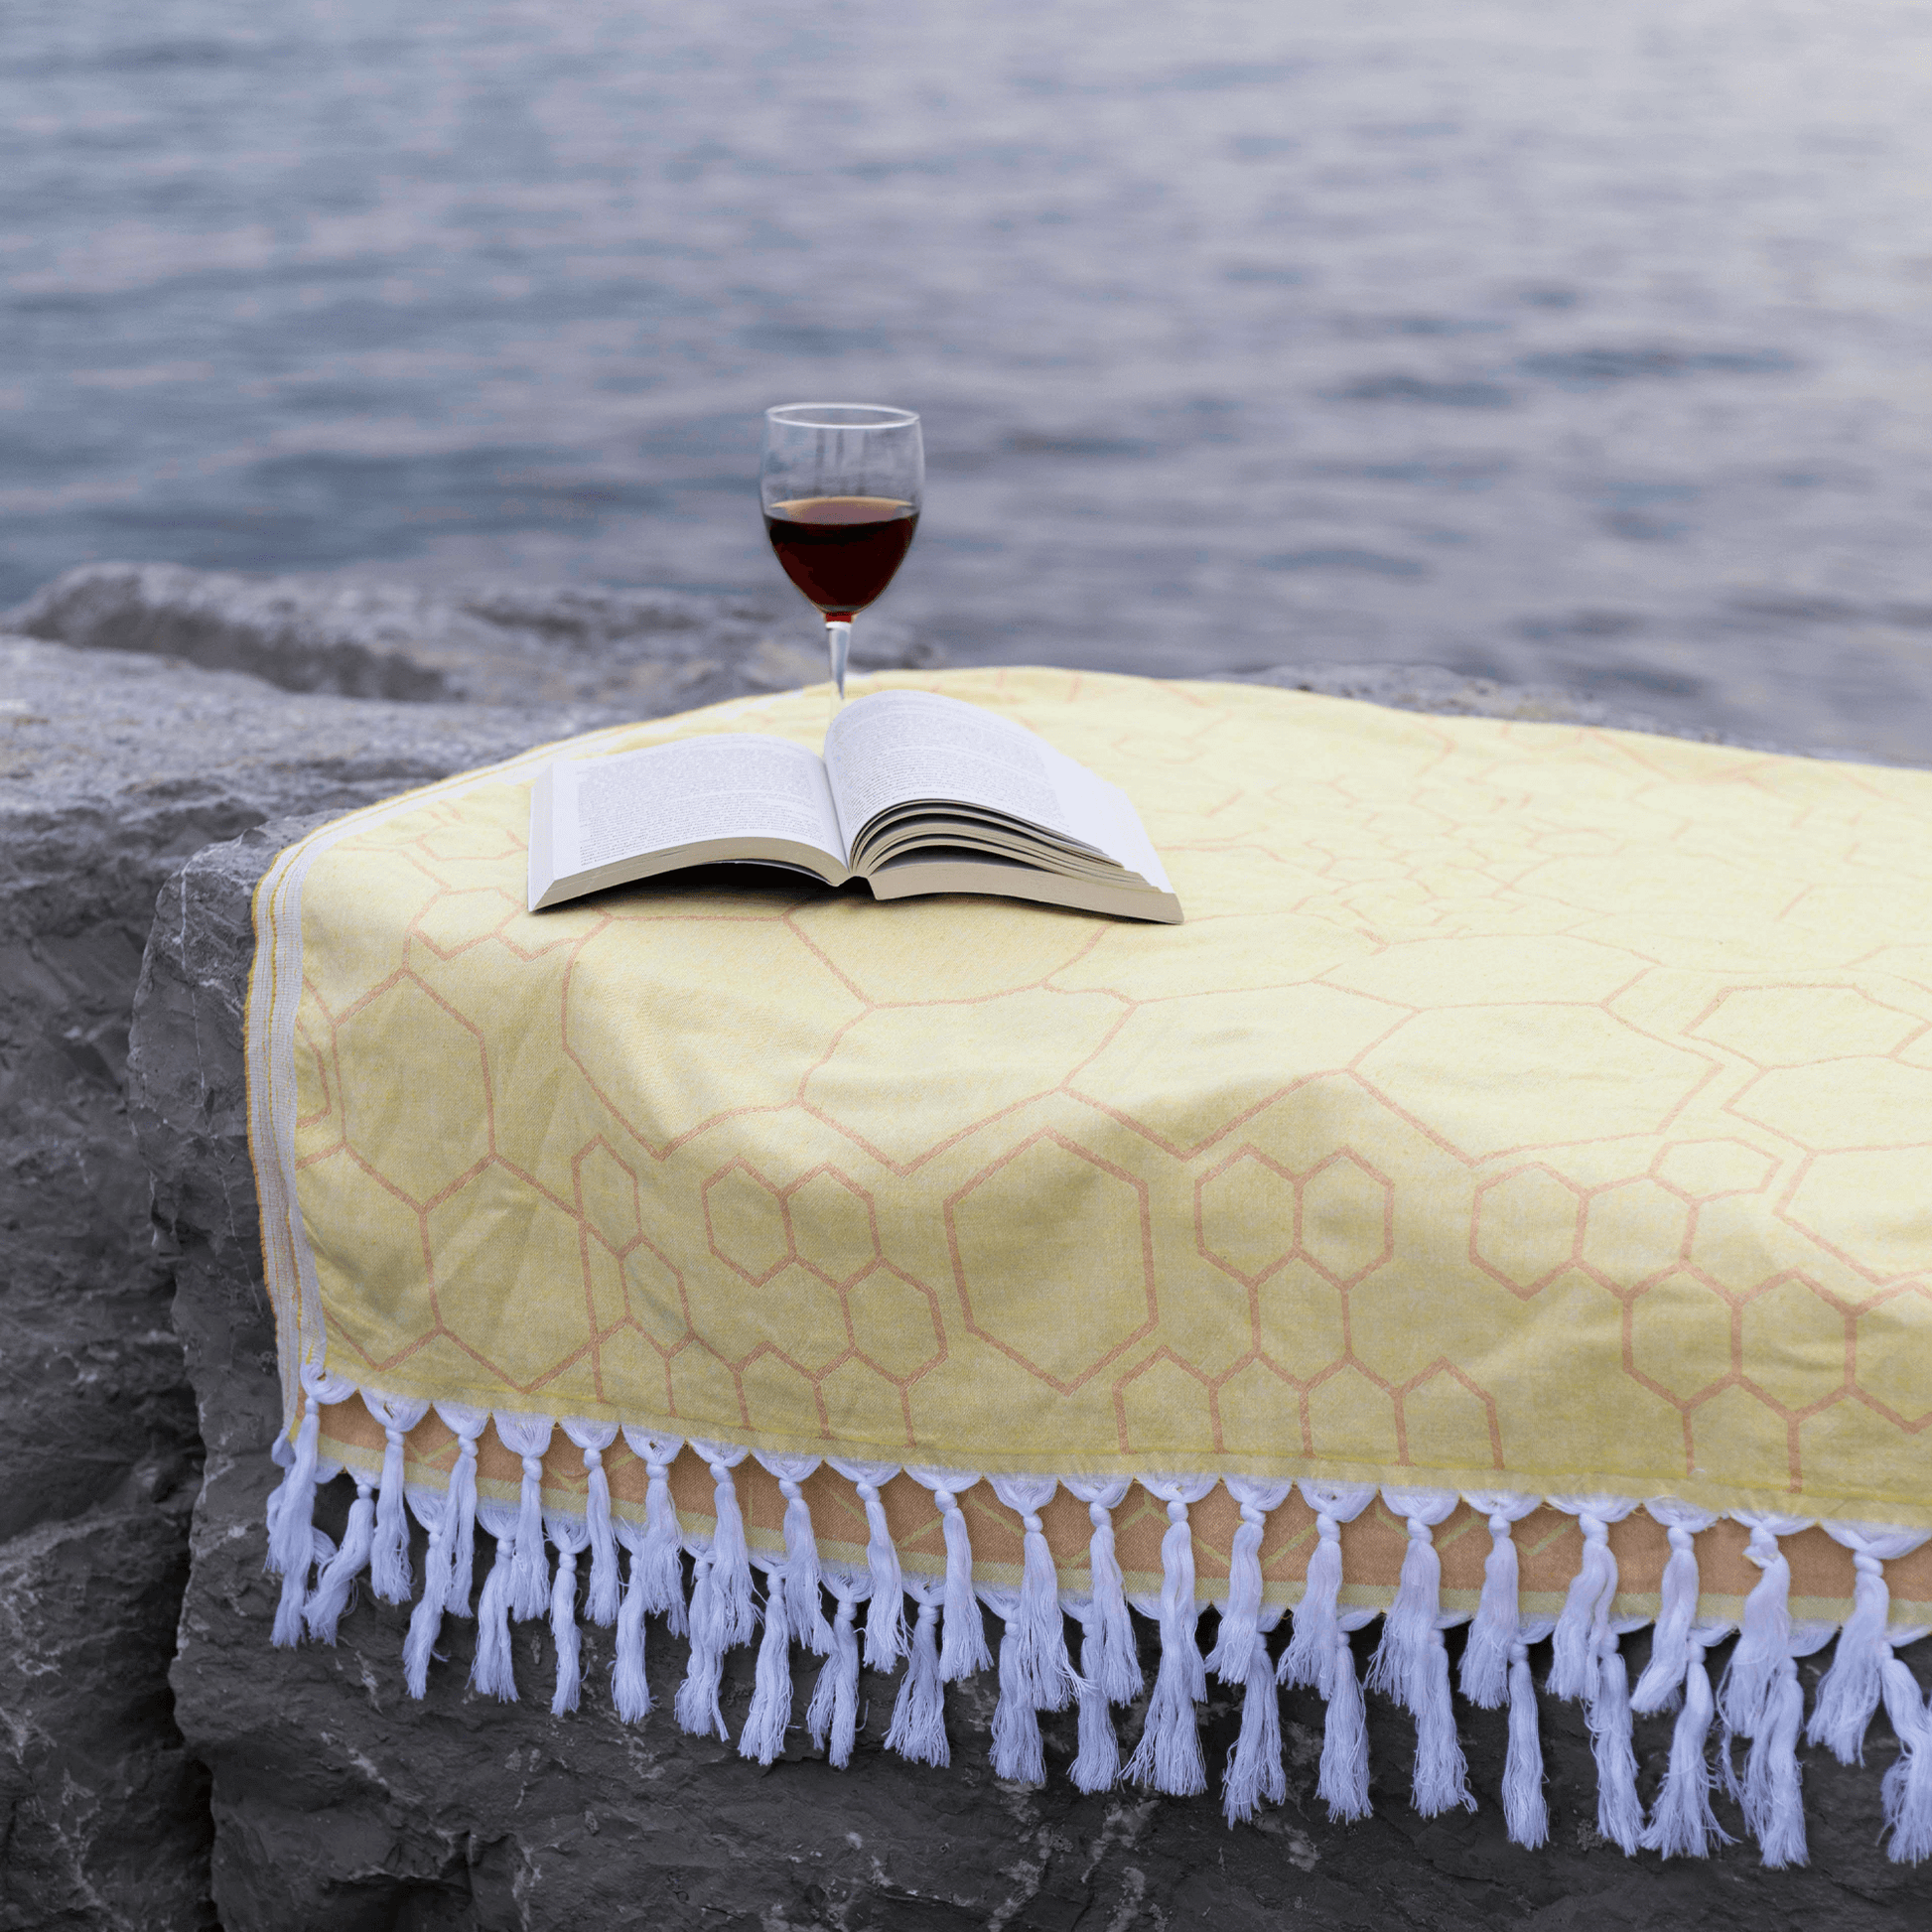 A yellow honeycomb Turkish towel lays on large rocks by the lake. A book and glass of red wine sits with them.